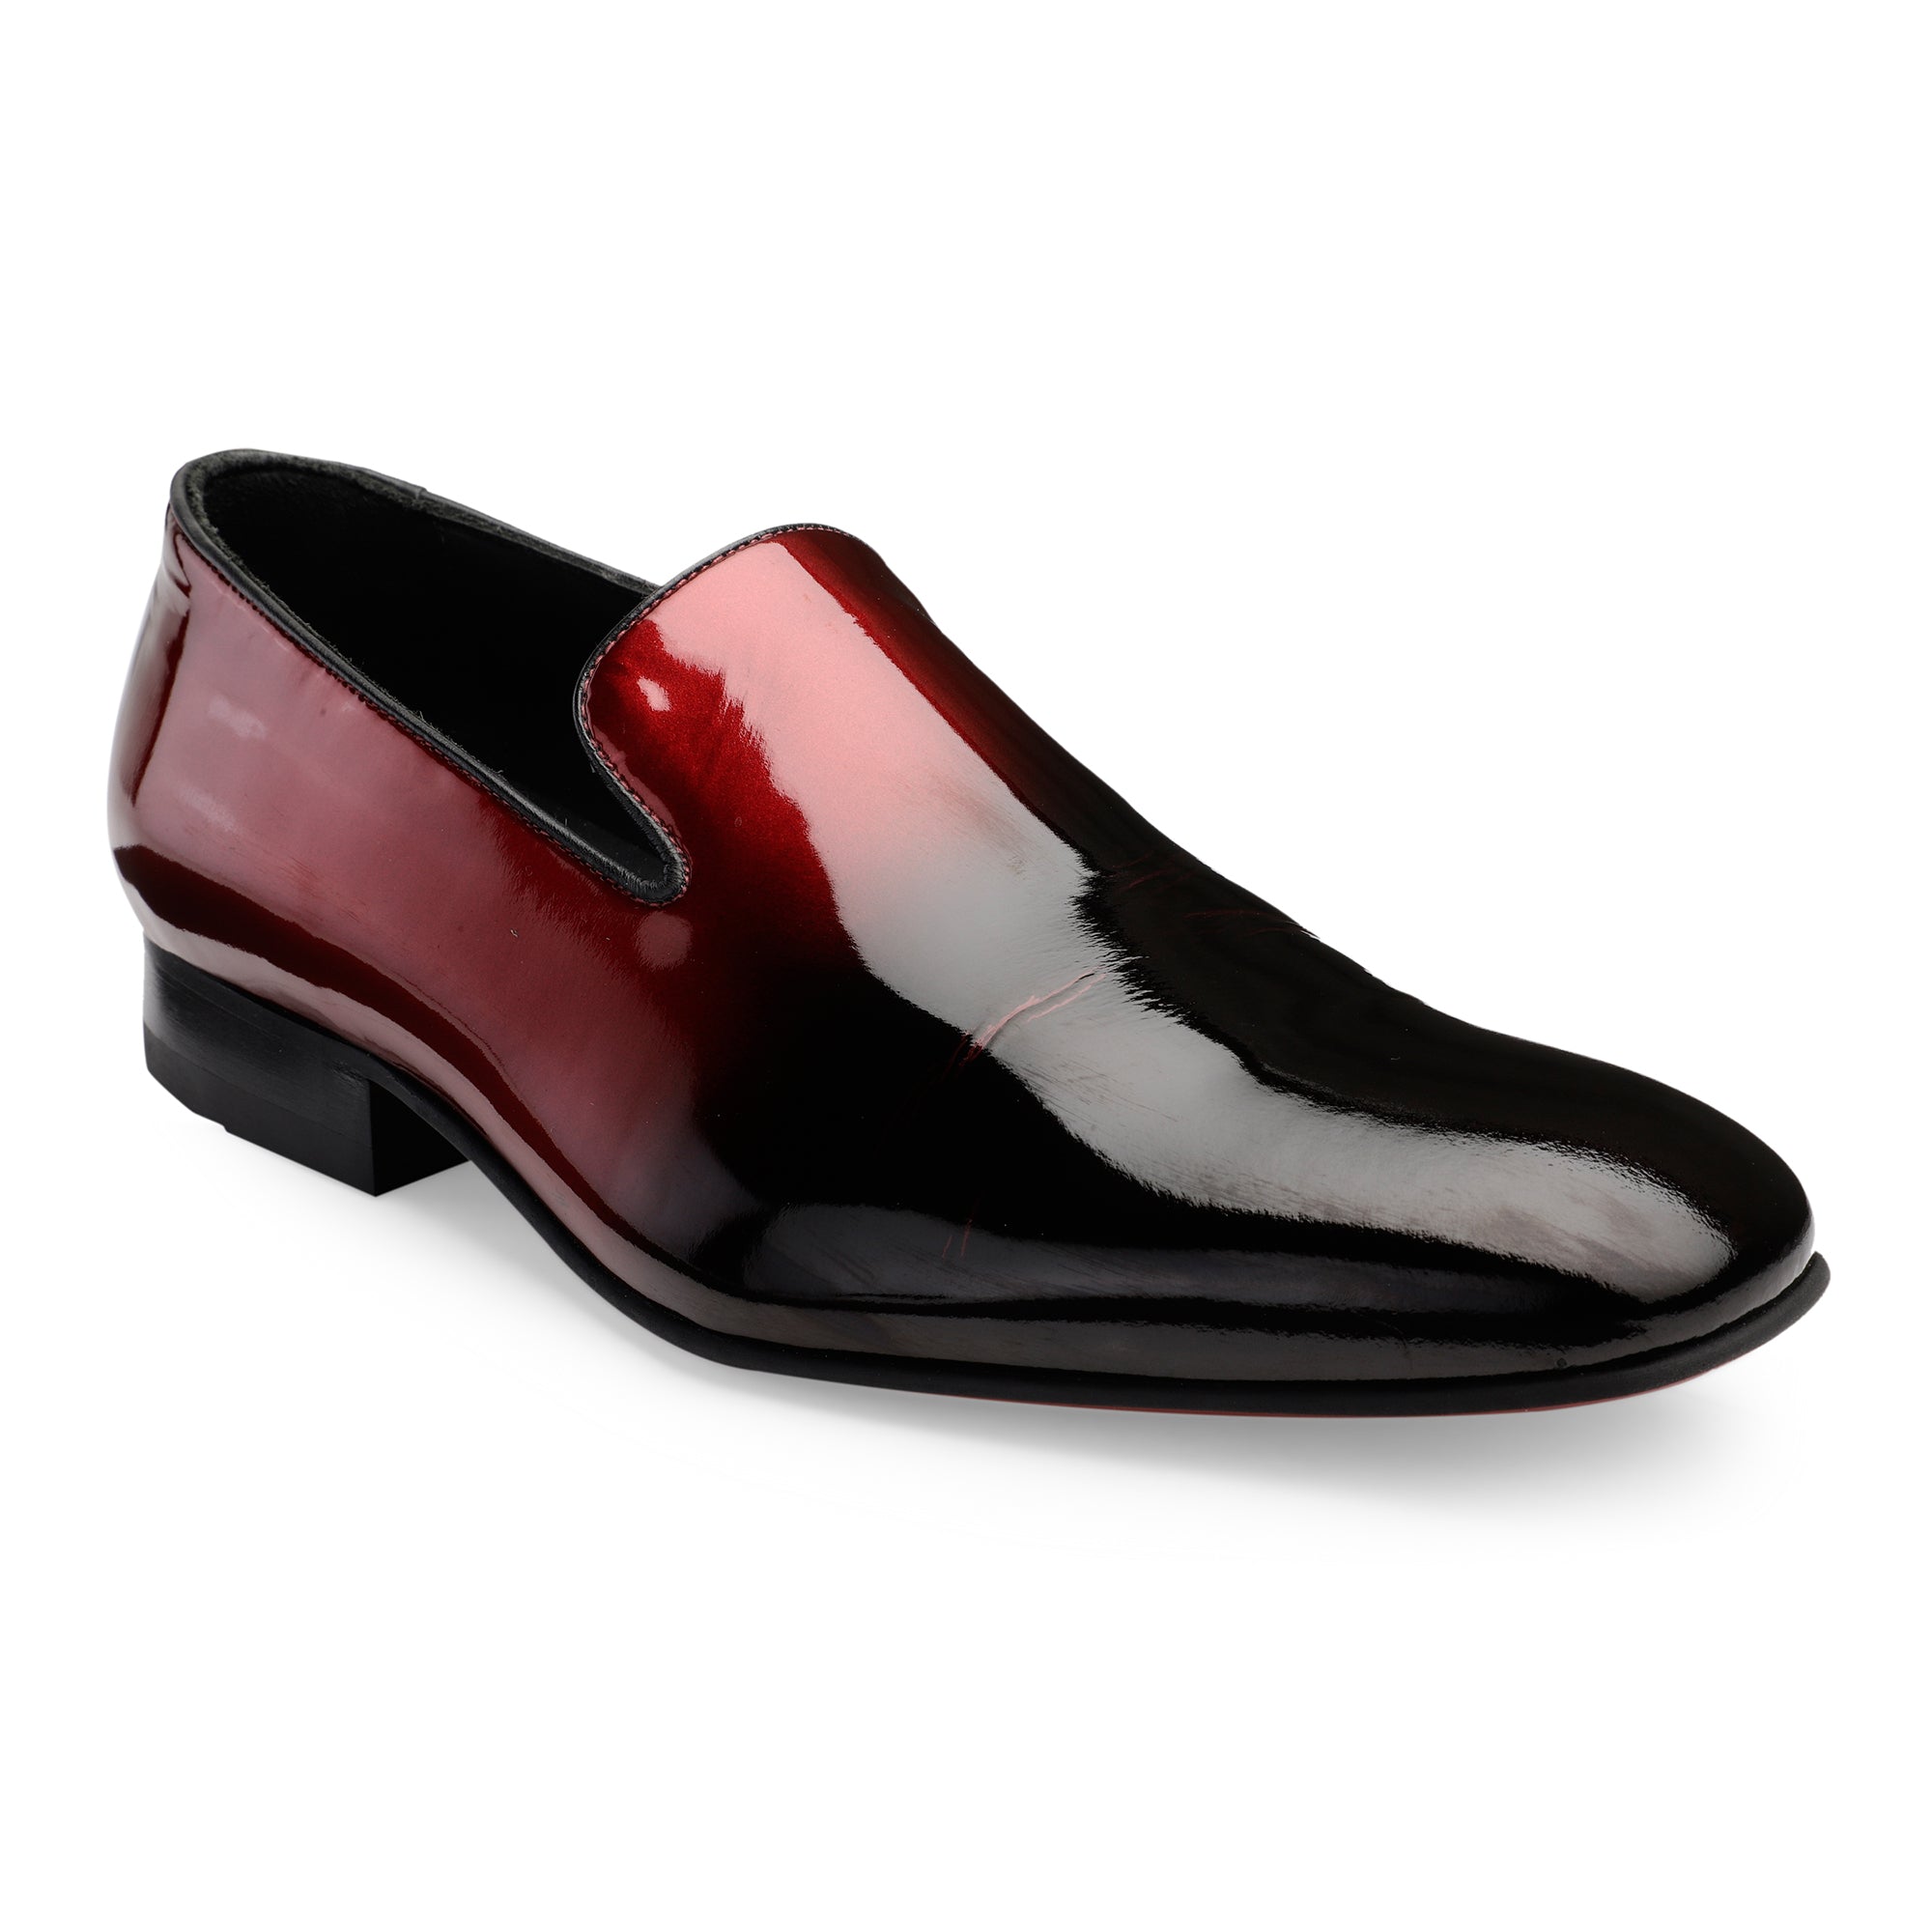 Men's Gold Chain Loafers Slip on Patent Leather Red Sole Dress Shoes 9 M US / Black